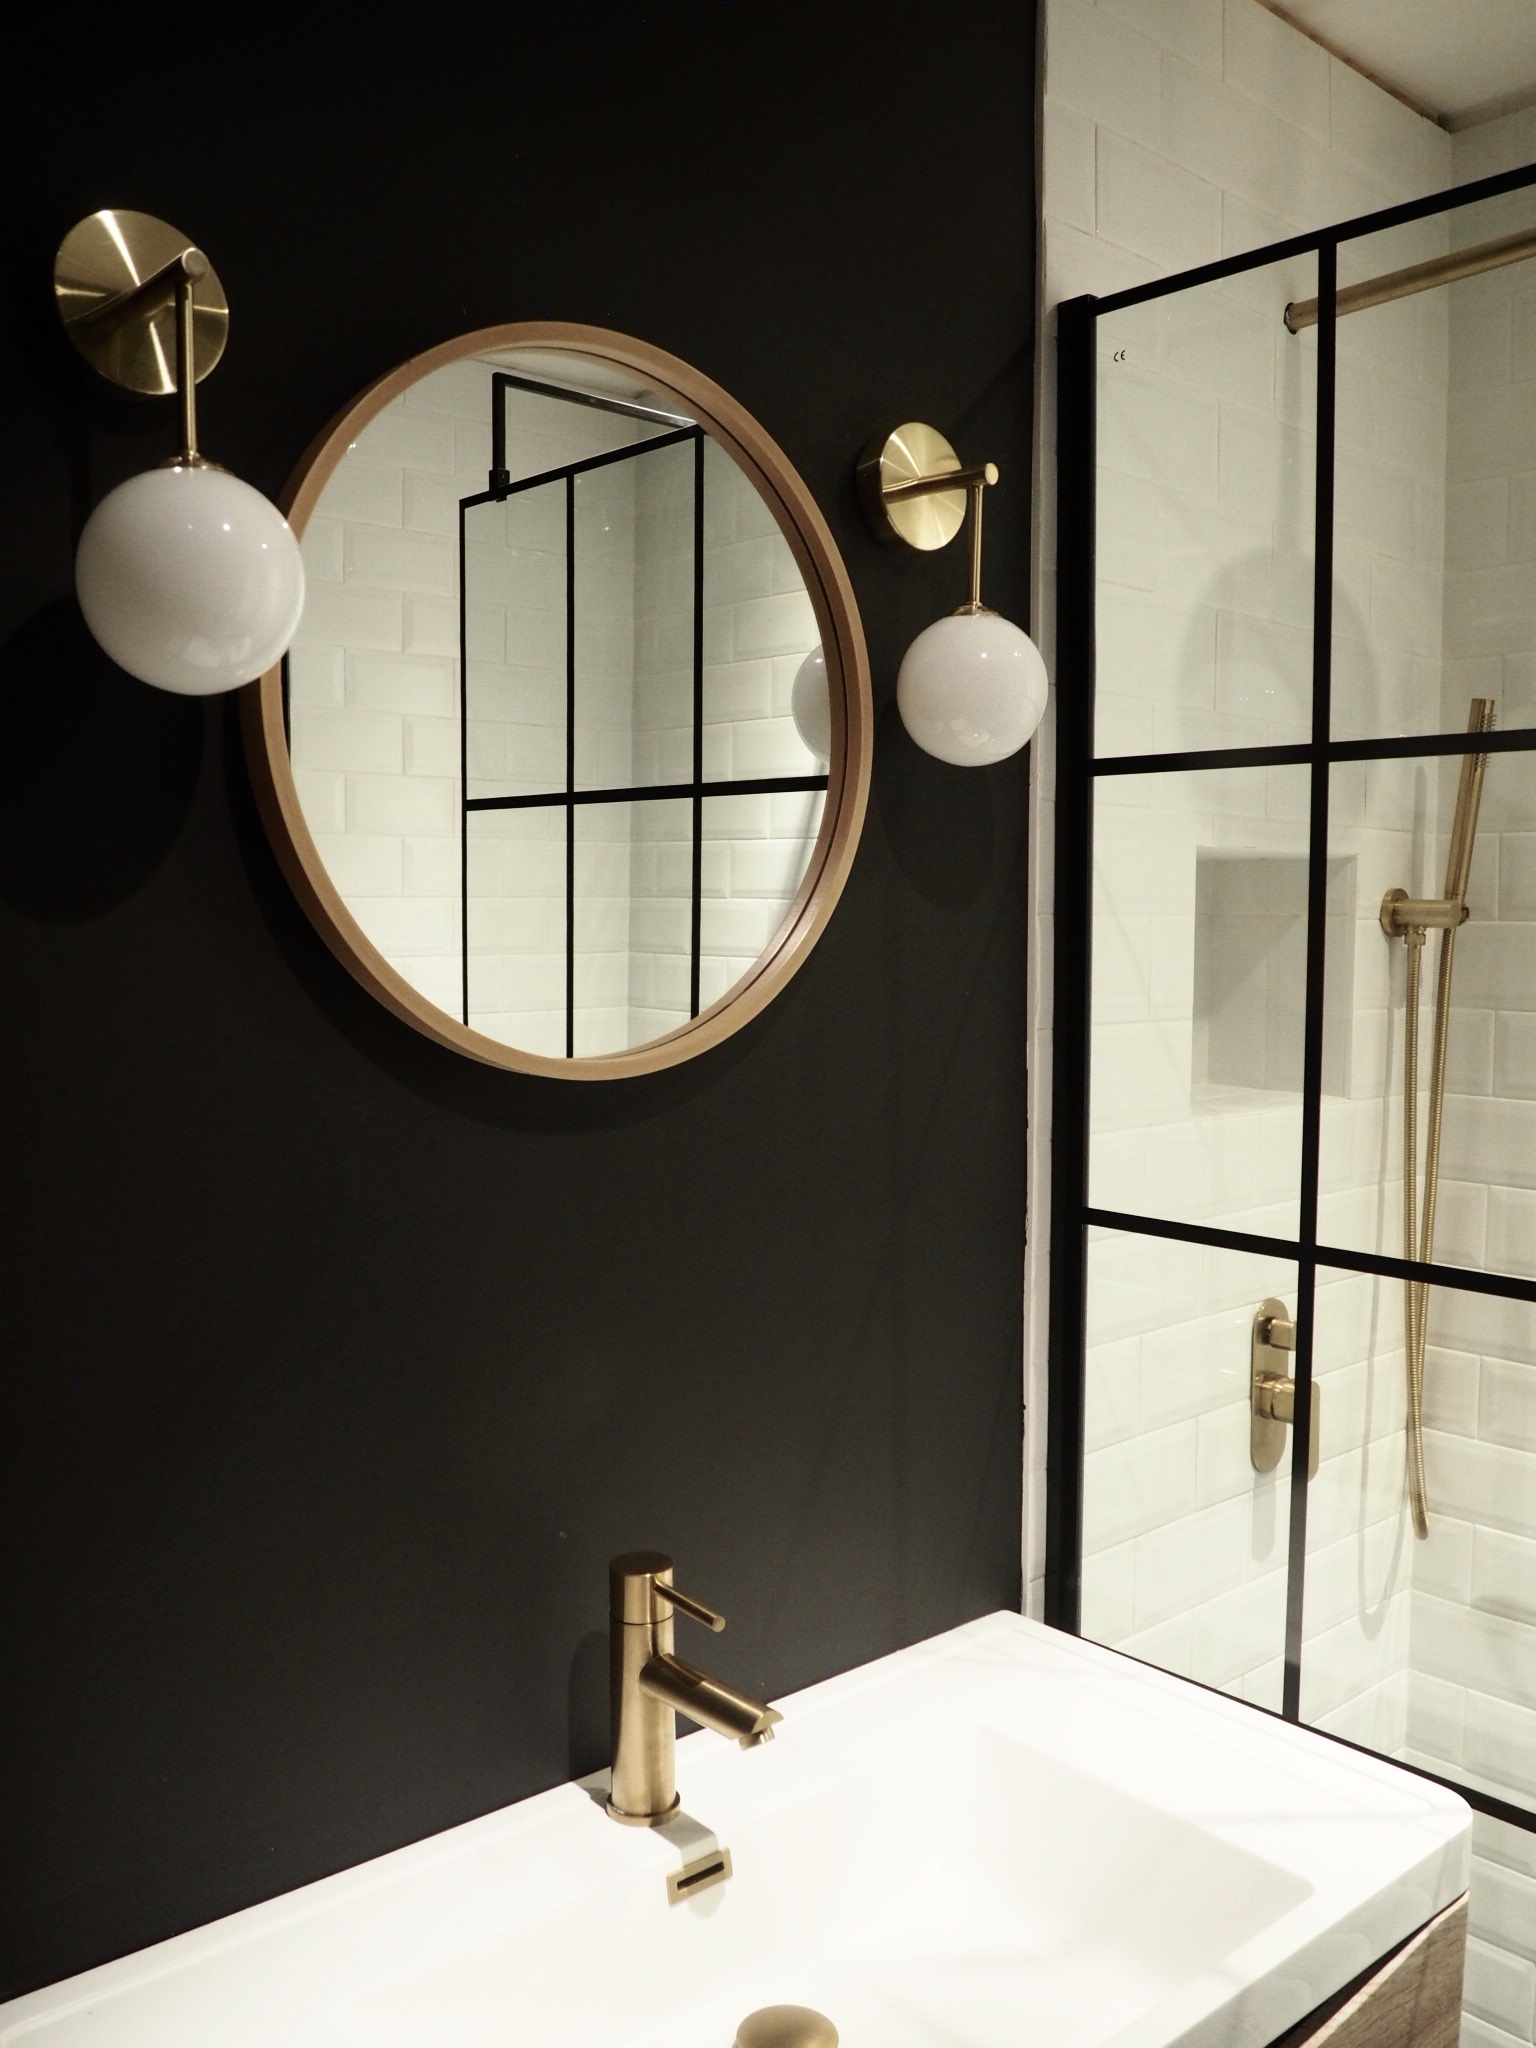 Natural wood vanity unit with round wood Zara Home mirror sitting above framed with two gold and white wall lights. Shower screen in Crittal style housing the brushed gold shower fittings and white subway tiles